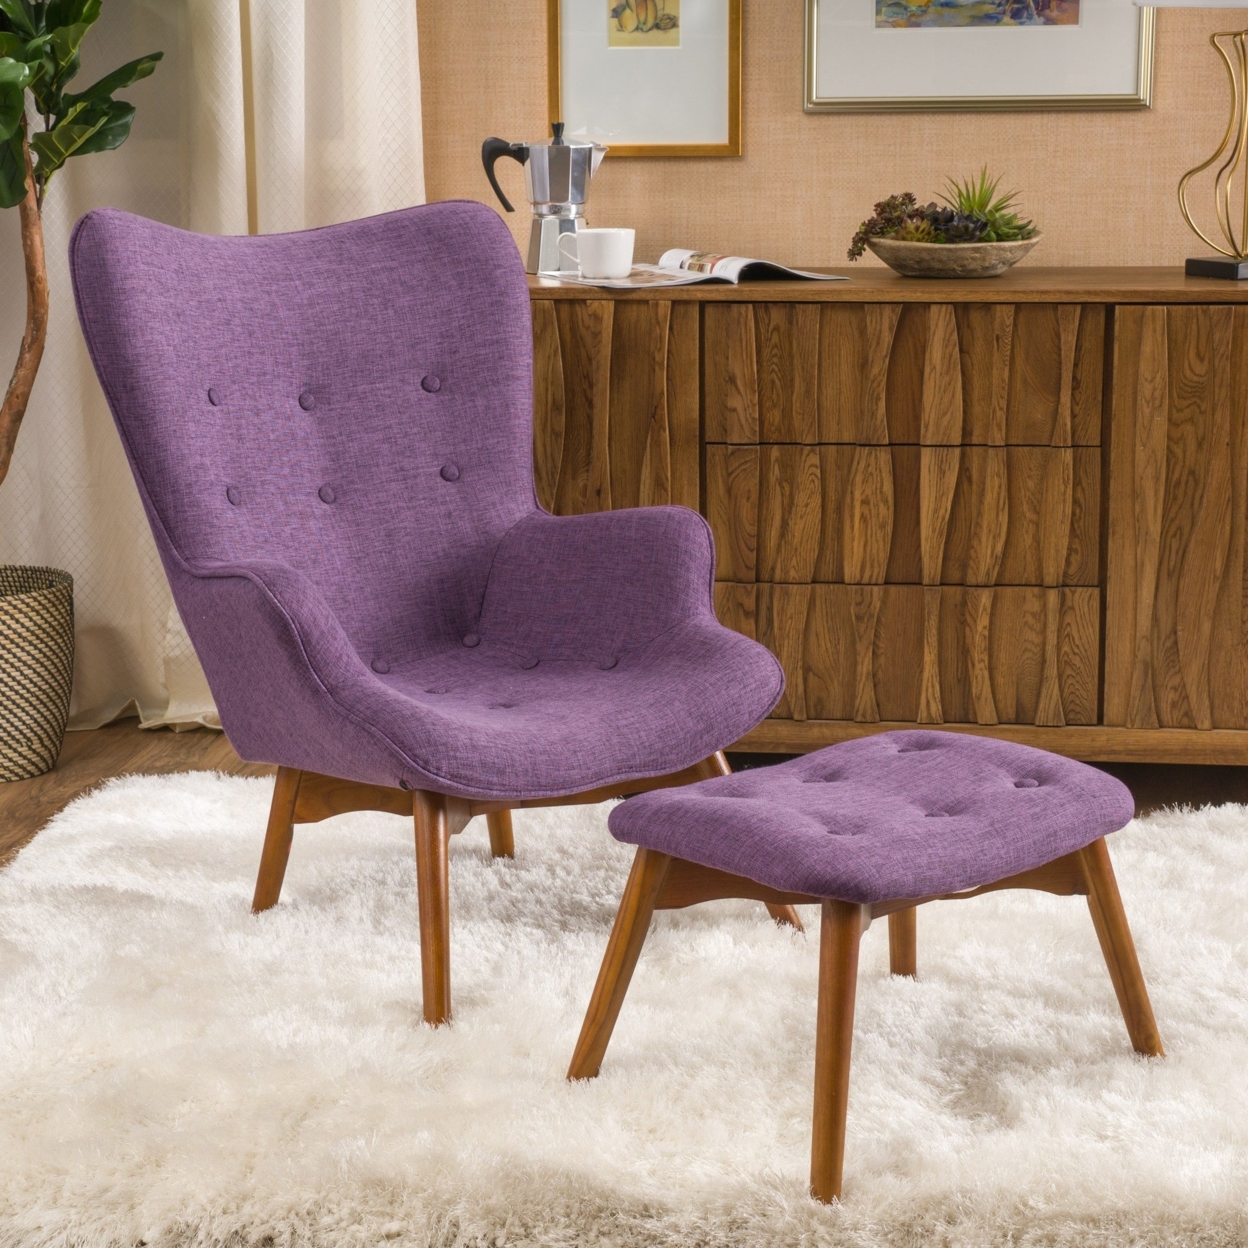 Acantha Fabric Contour Chair With Footstool Set - Purple